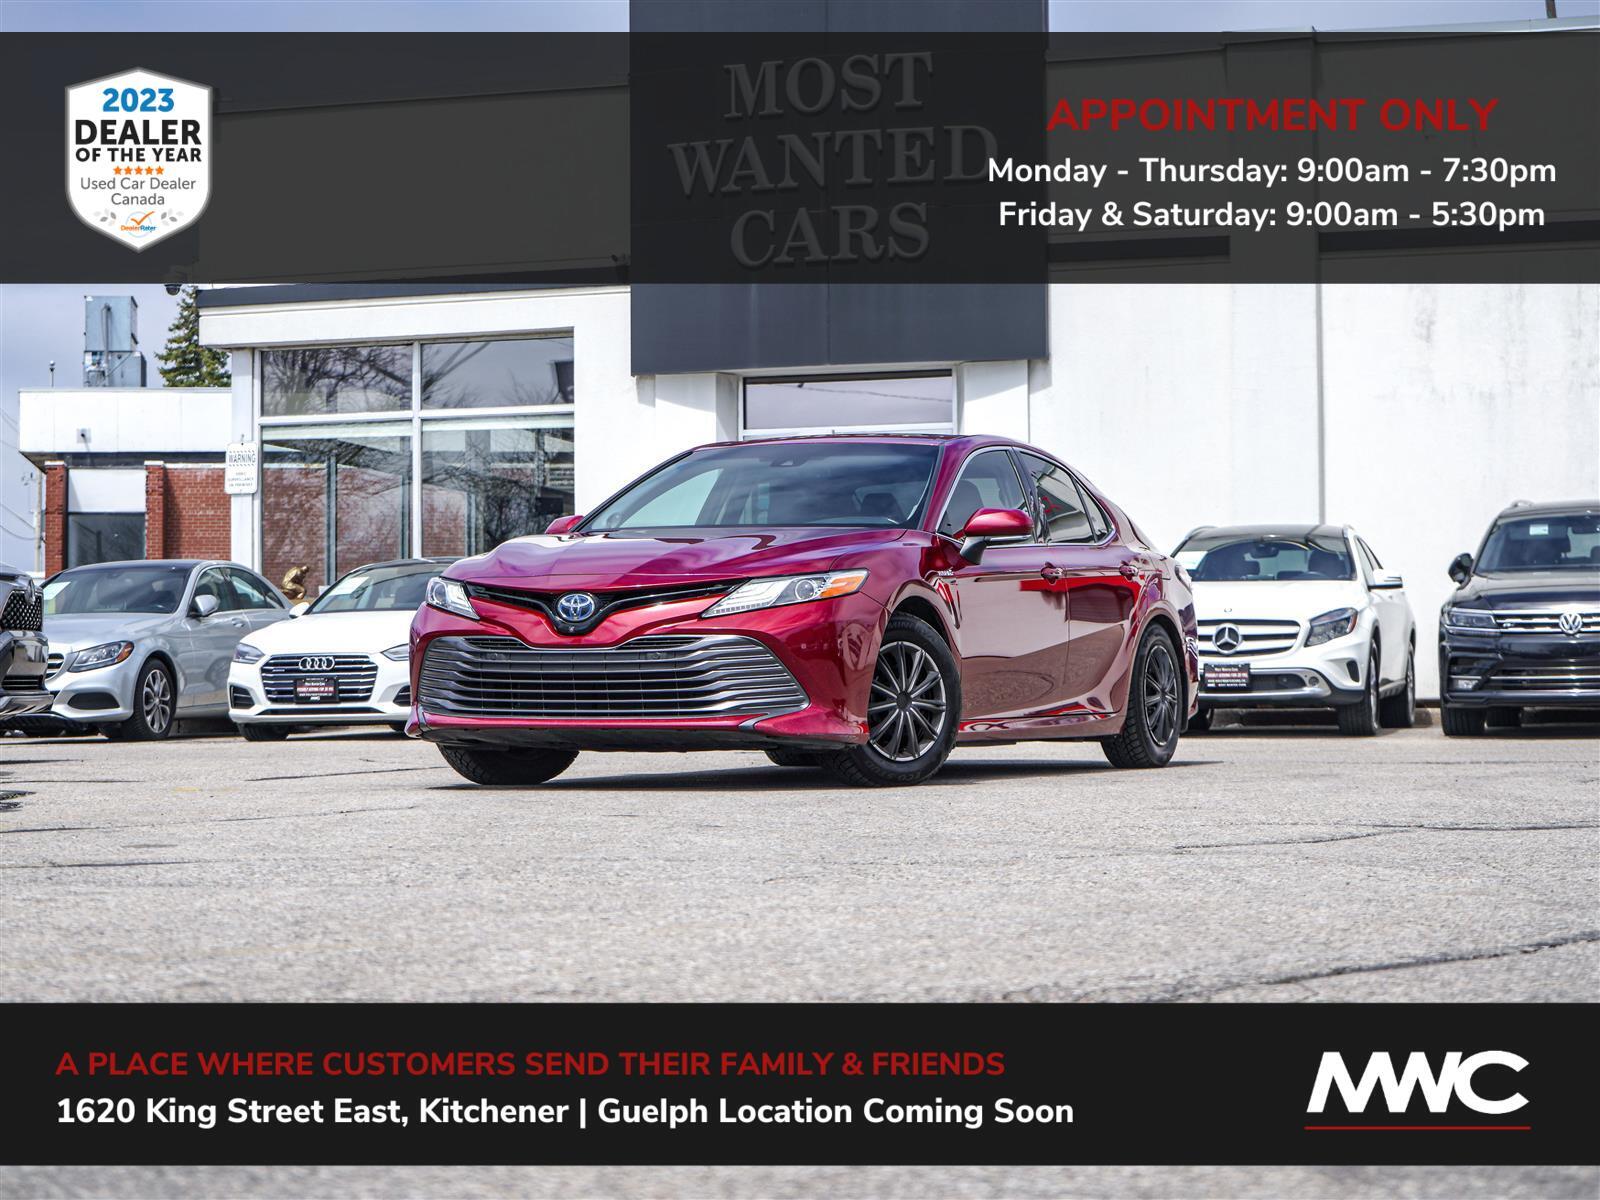 2018 Toyota Camry XLE HYBRID | IN GUELPH, BY APPT. ONLY